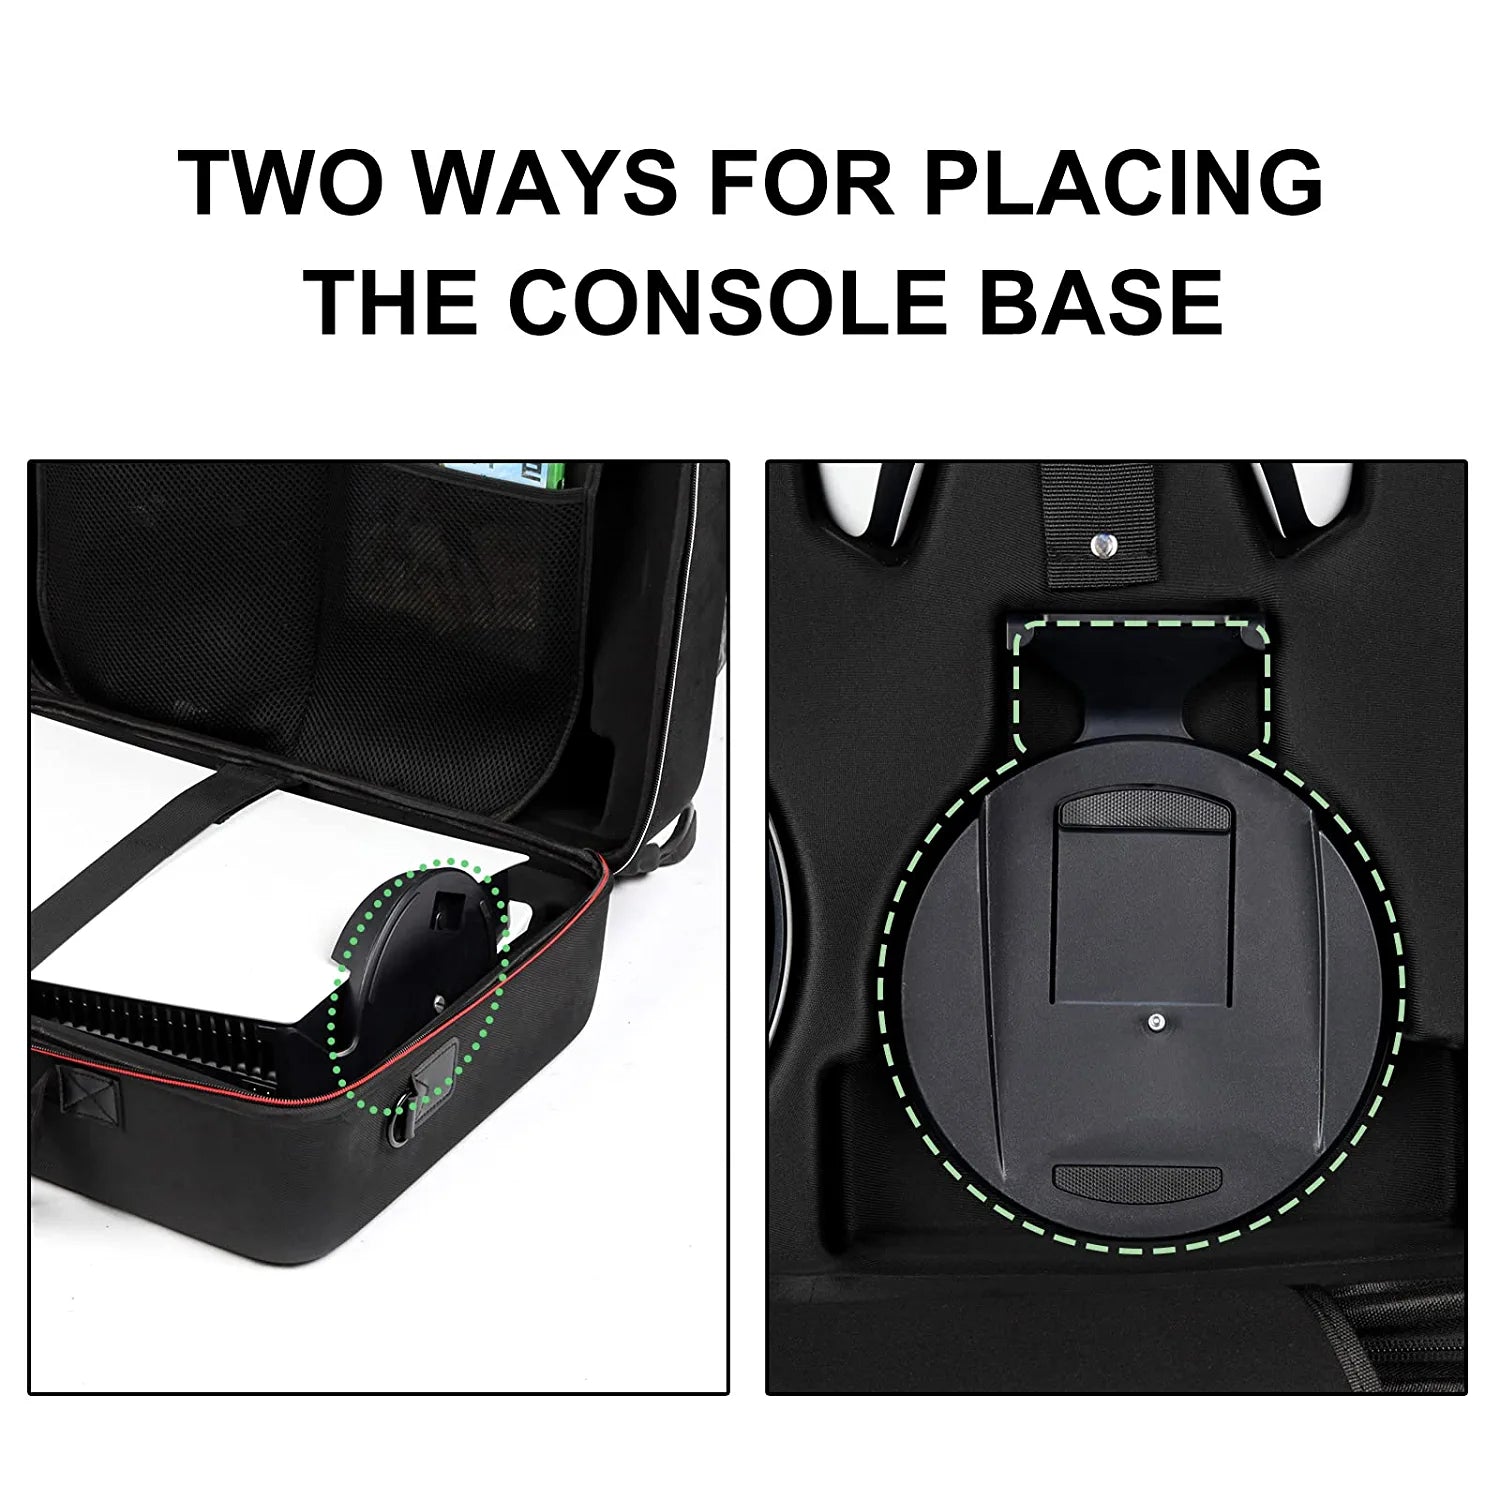 Hard Case Compatible with PS5, Protective Travel Case for Playstation 5, Dualsense Controllers, Pulse 3D Wireless Headset, Base and Other Accessories